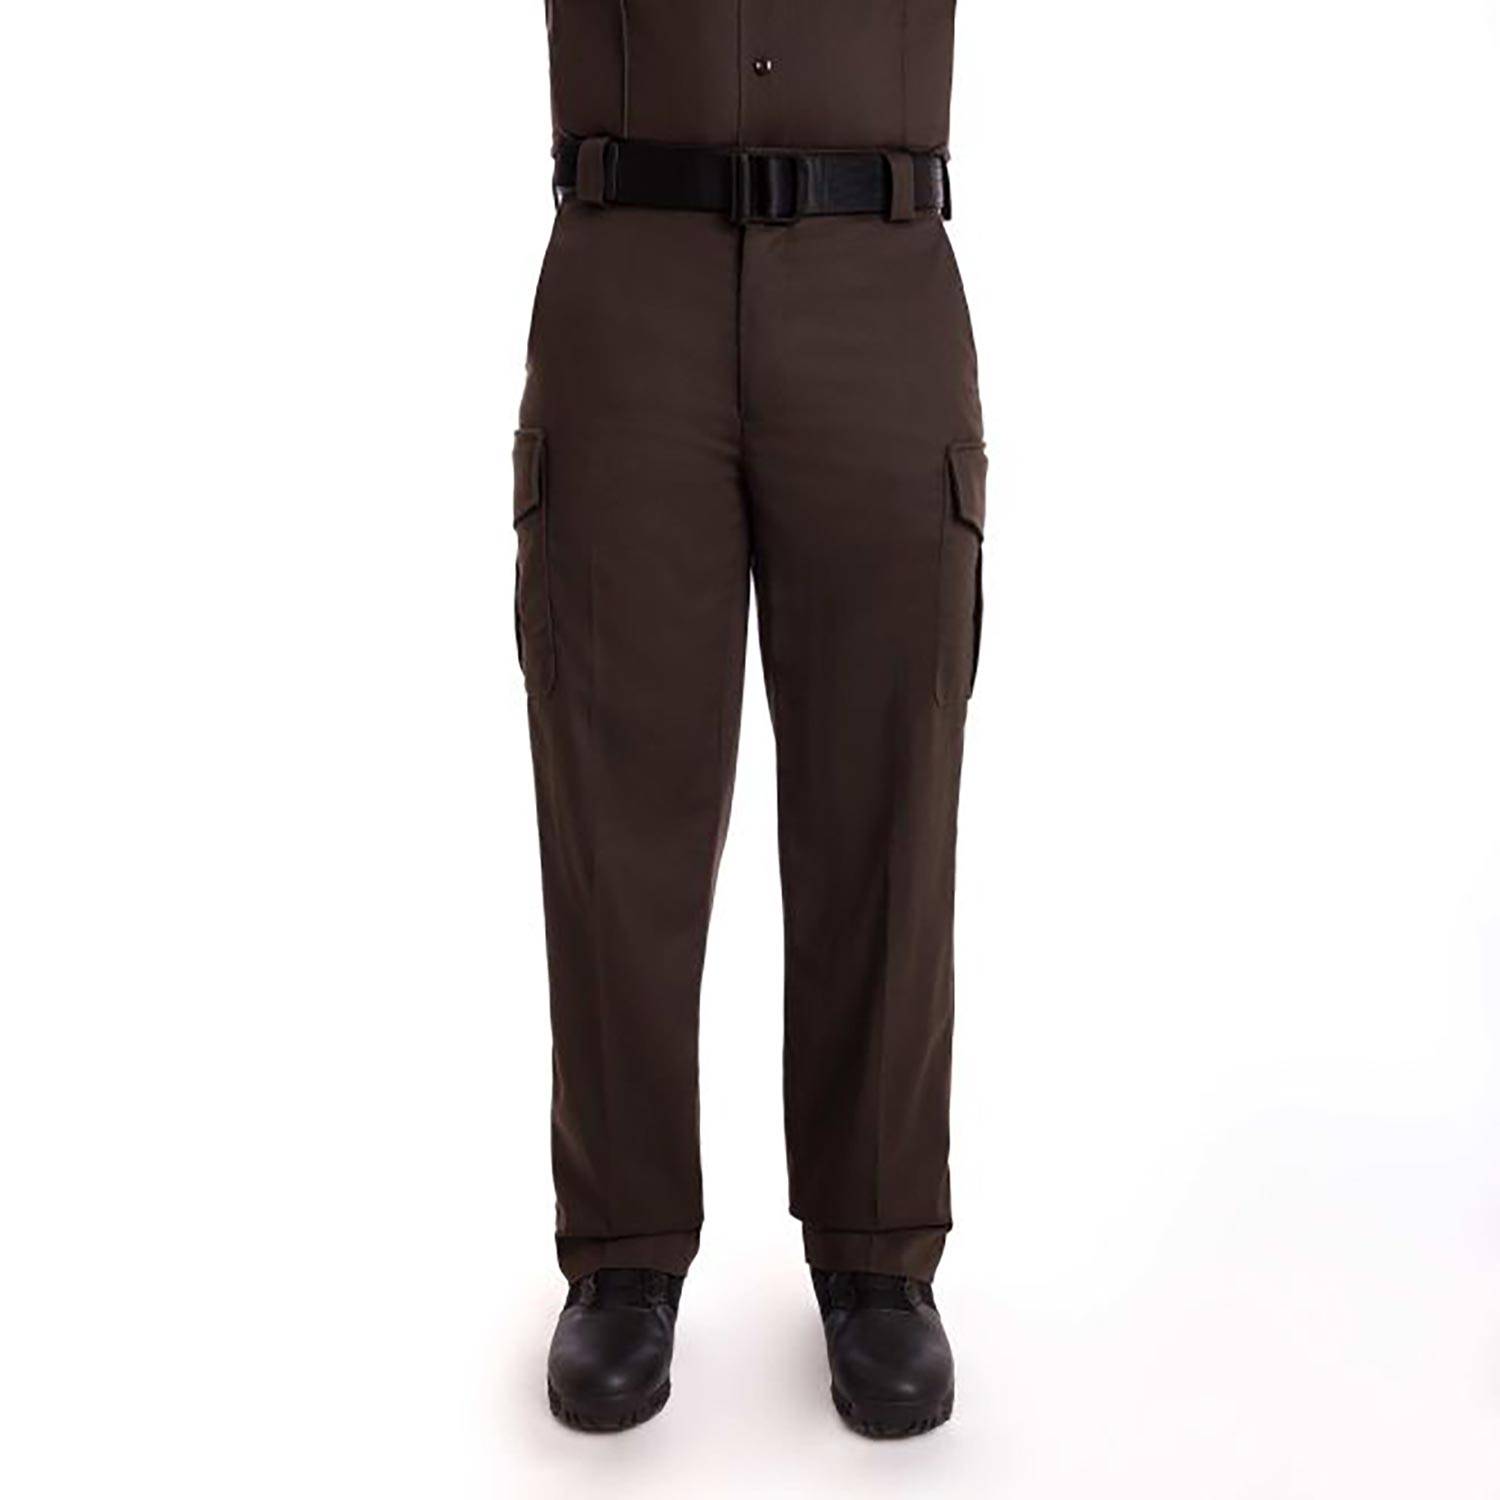 Elbeco Top Authority 100% Polyester Trousers - Navy